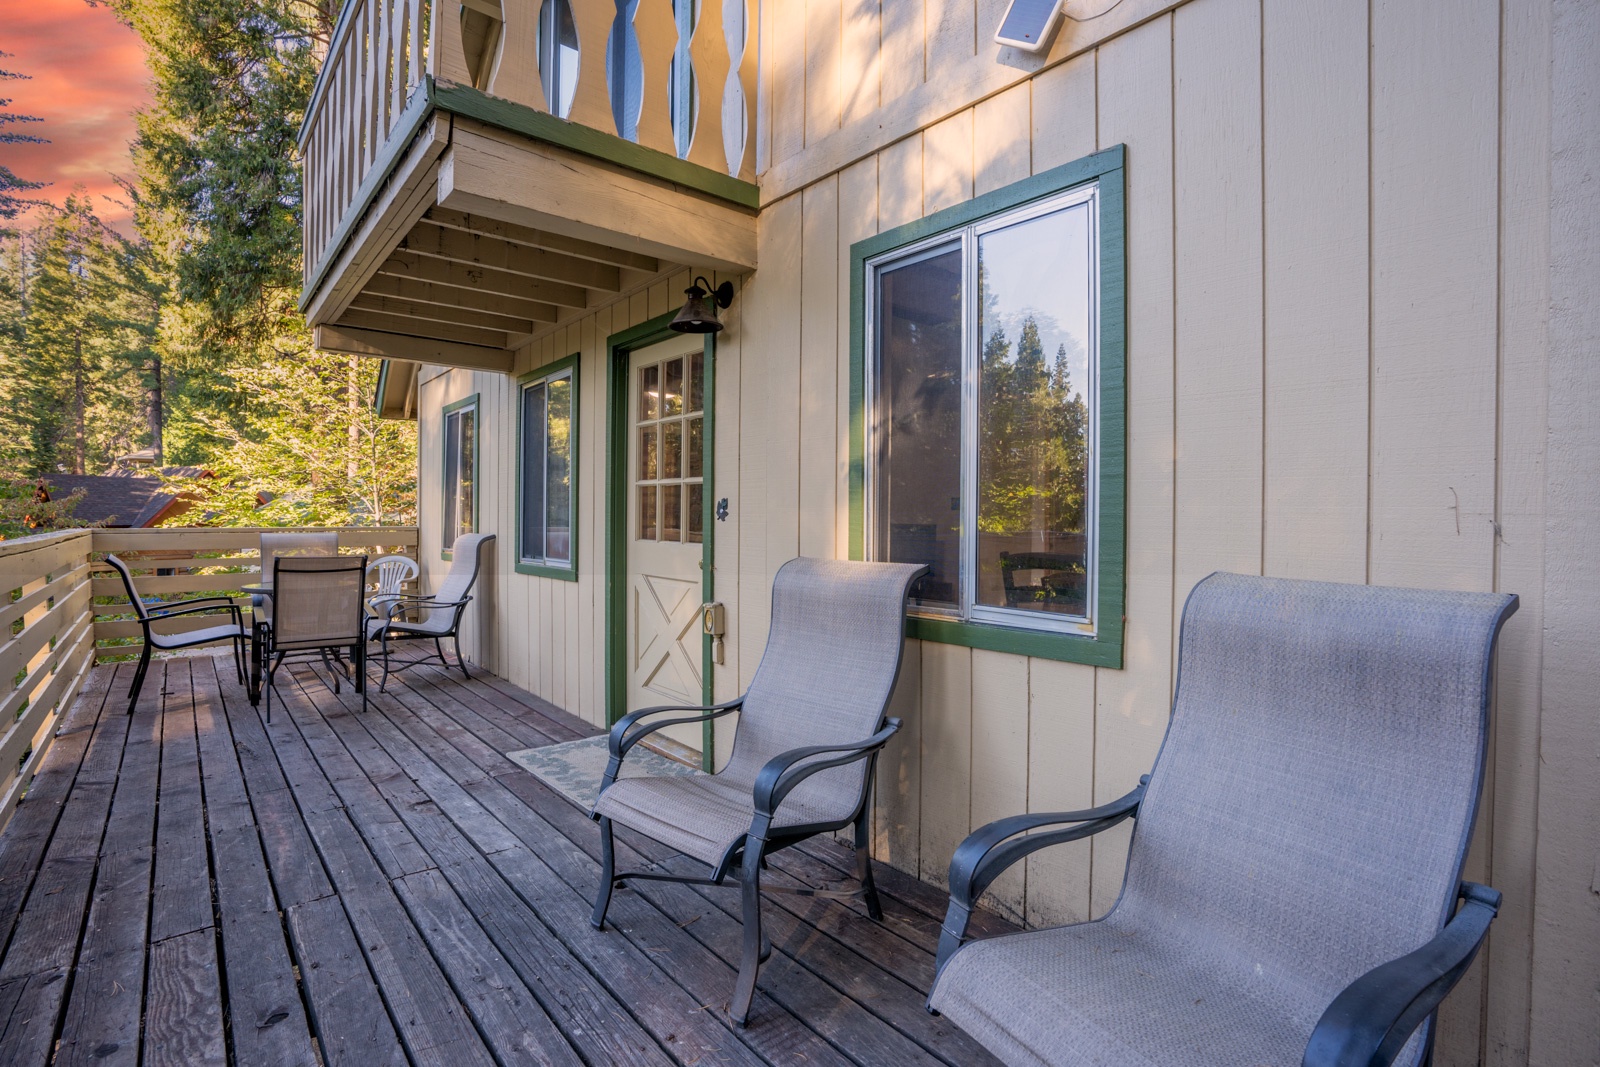 Lounge the day away or dine alfresco on the spacious deck